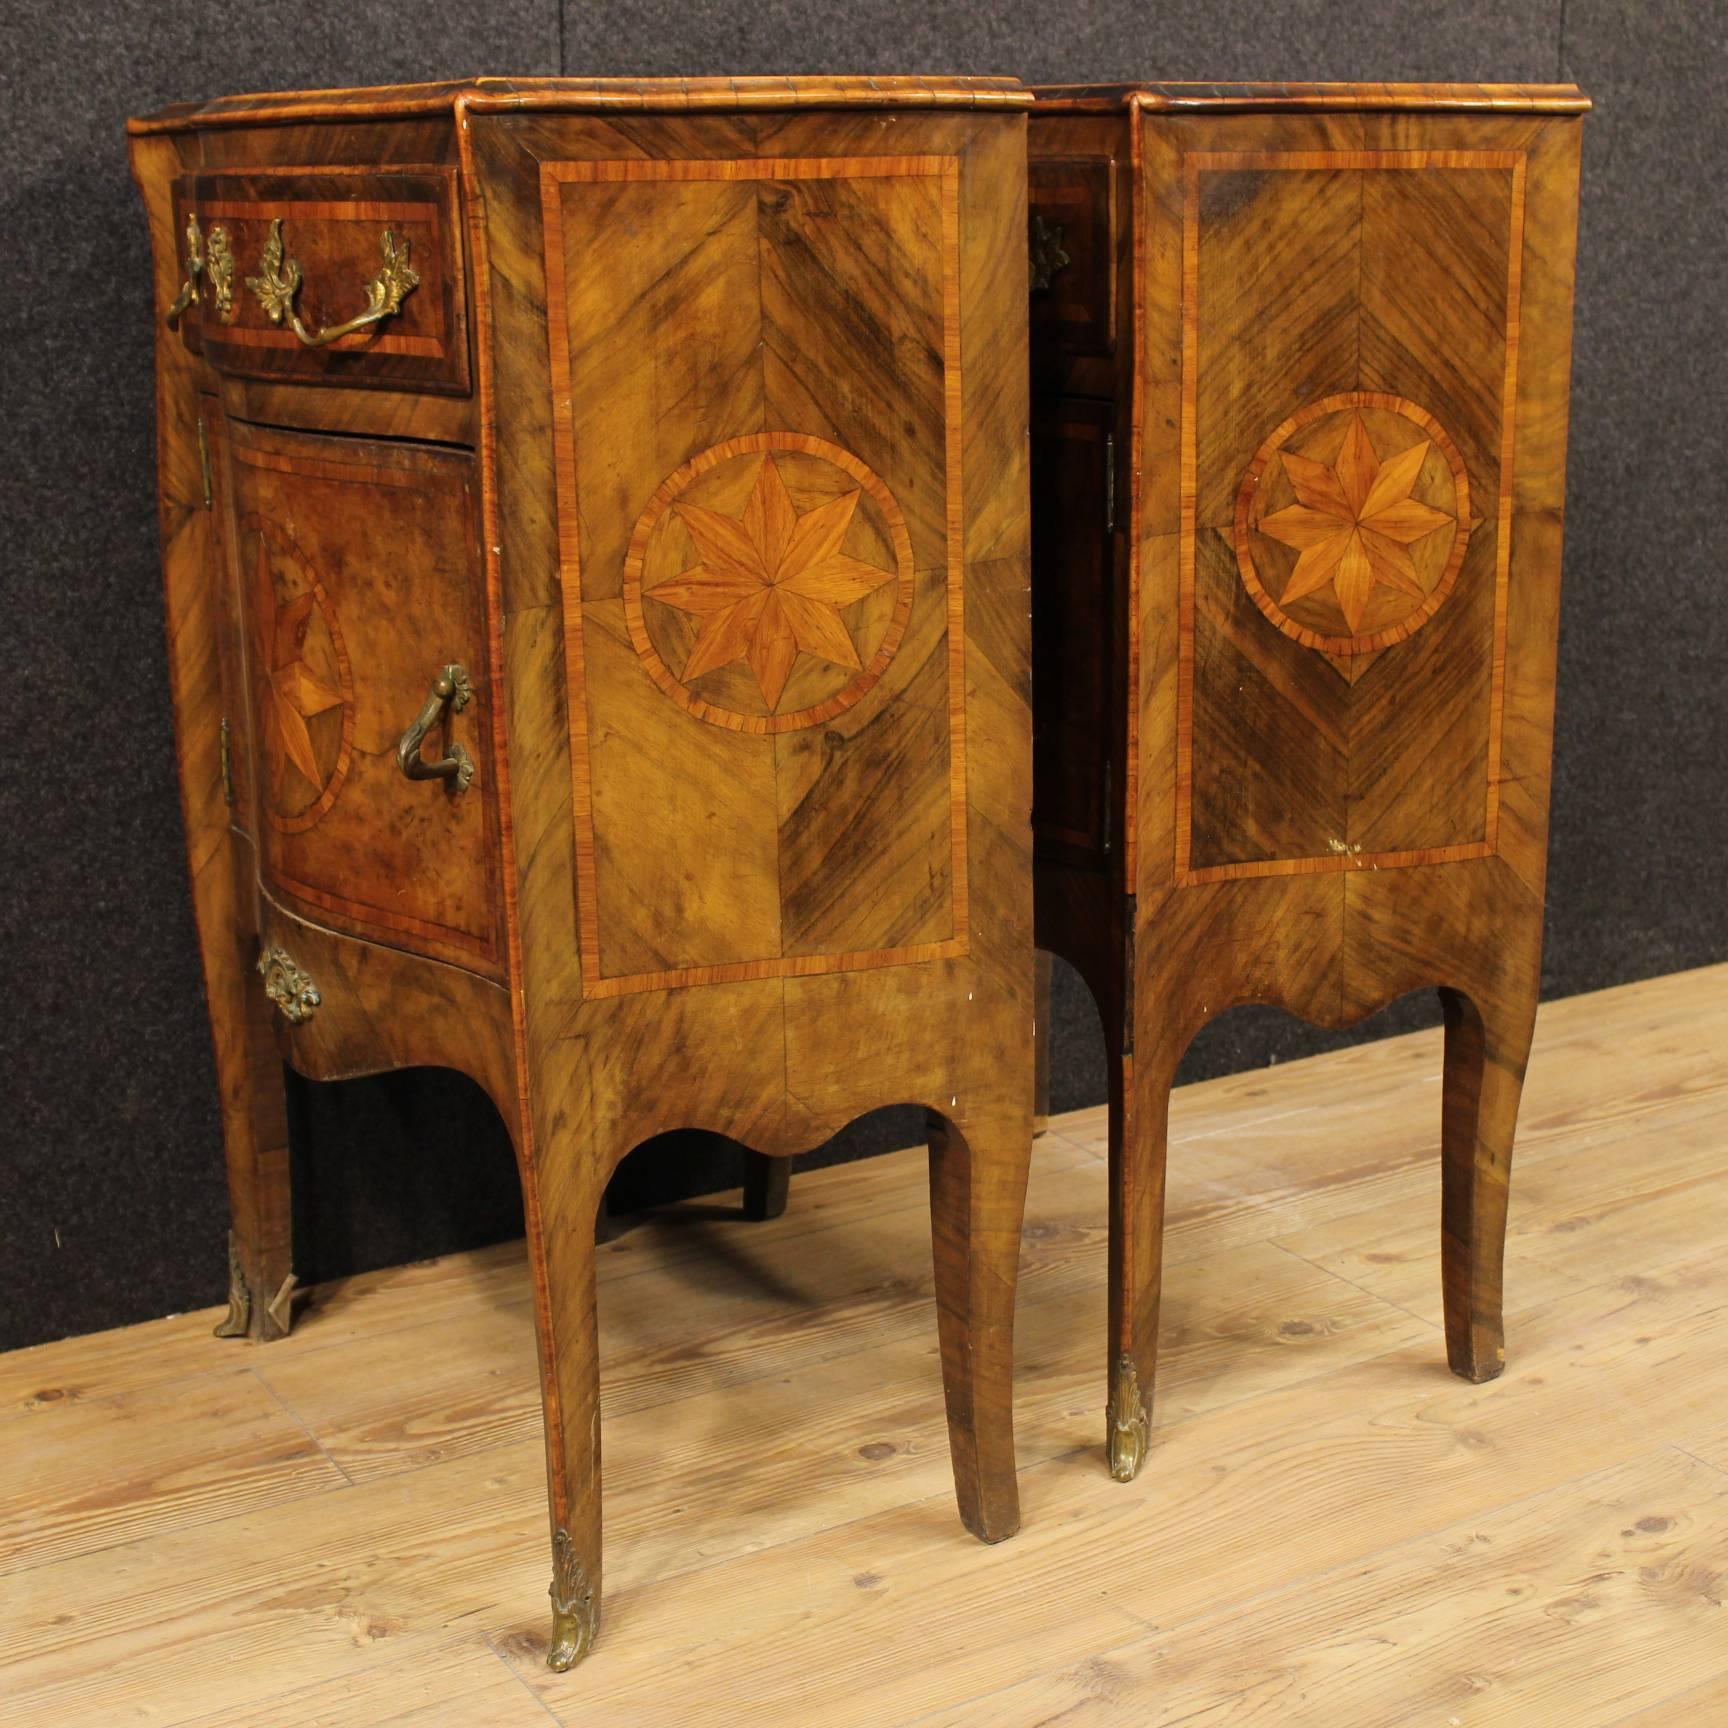 Pair of Neapolitan bedside of the second half of the 19th century. Furniture of beautiful line and pleasantly inlaid in walnut, burl walnut and rosewood wood. Bedside tables with marble top built in excellent condition. Furniture that have one door